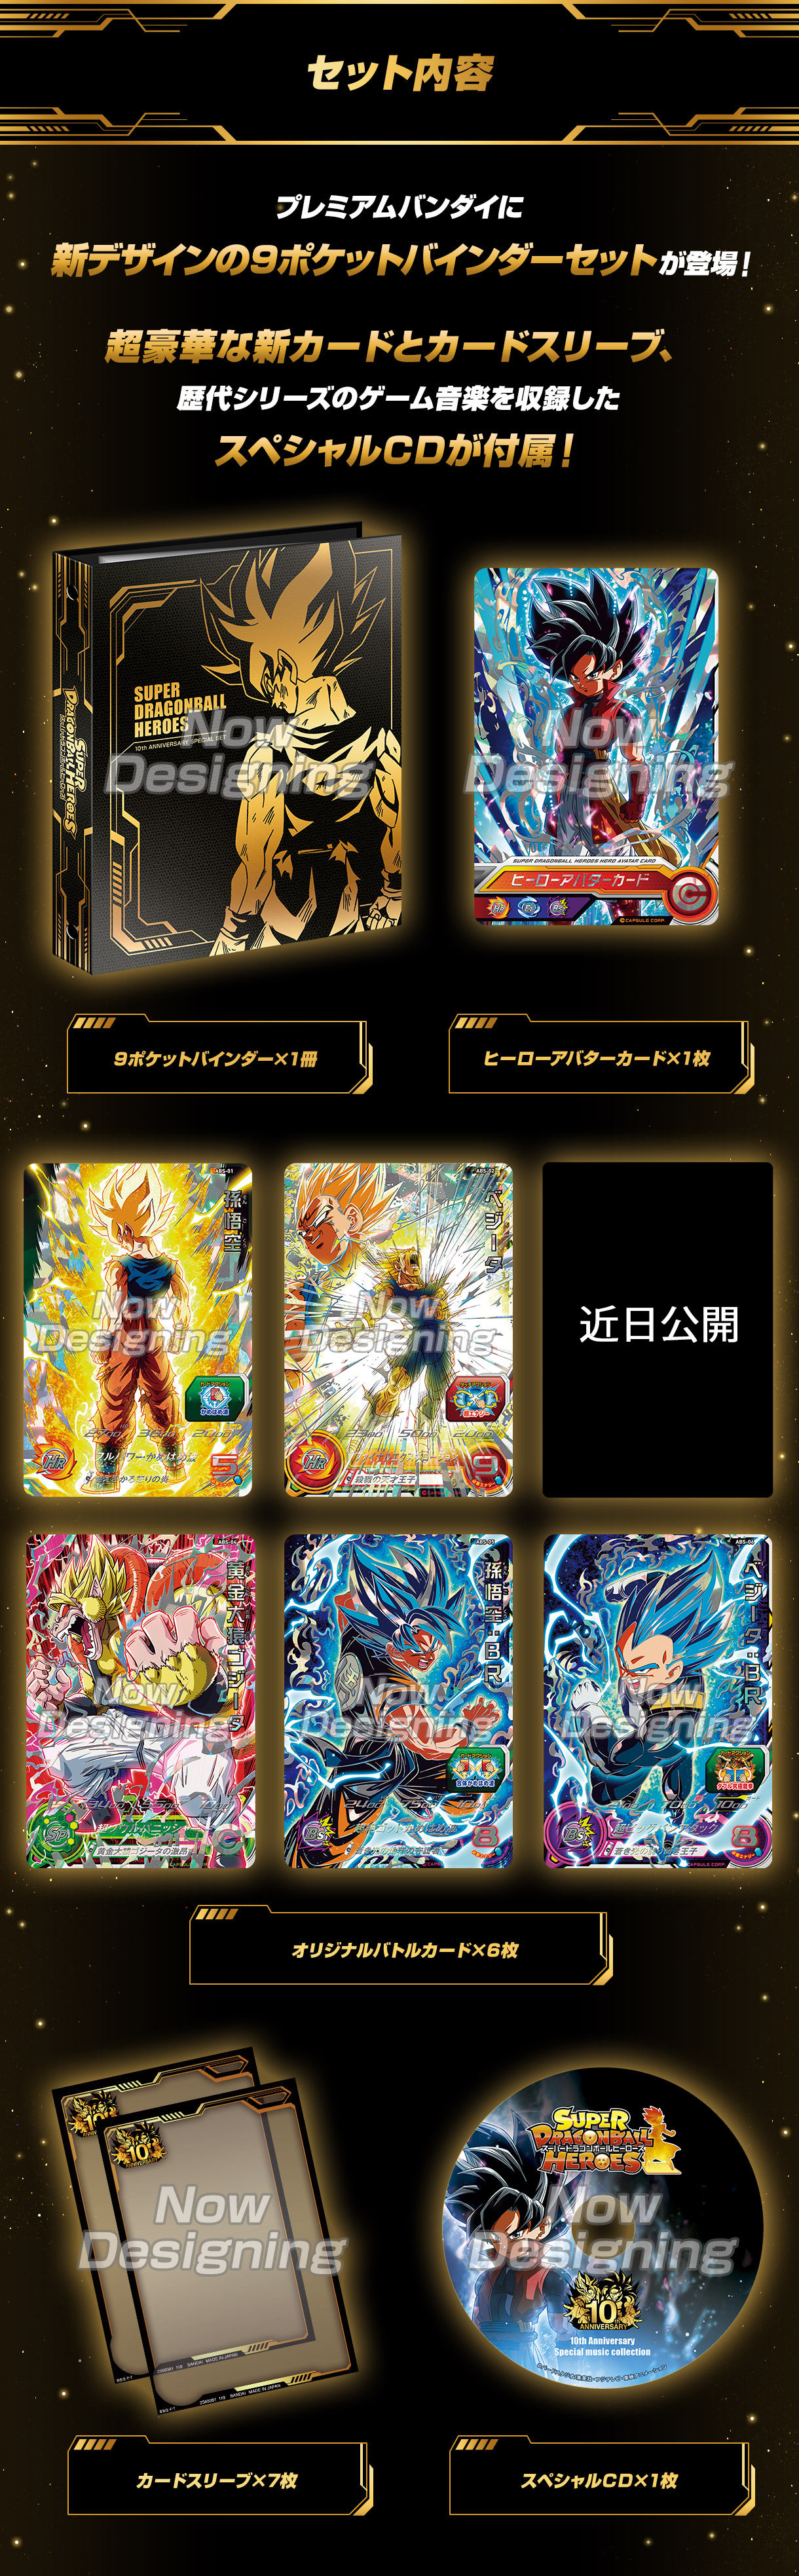 Super Dragon Ball Heroes - Special Set 10th Anniversary Special